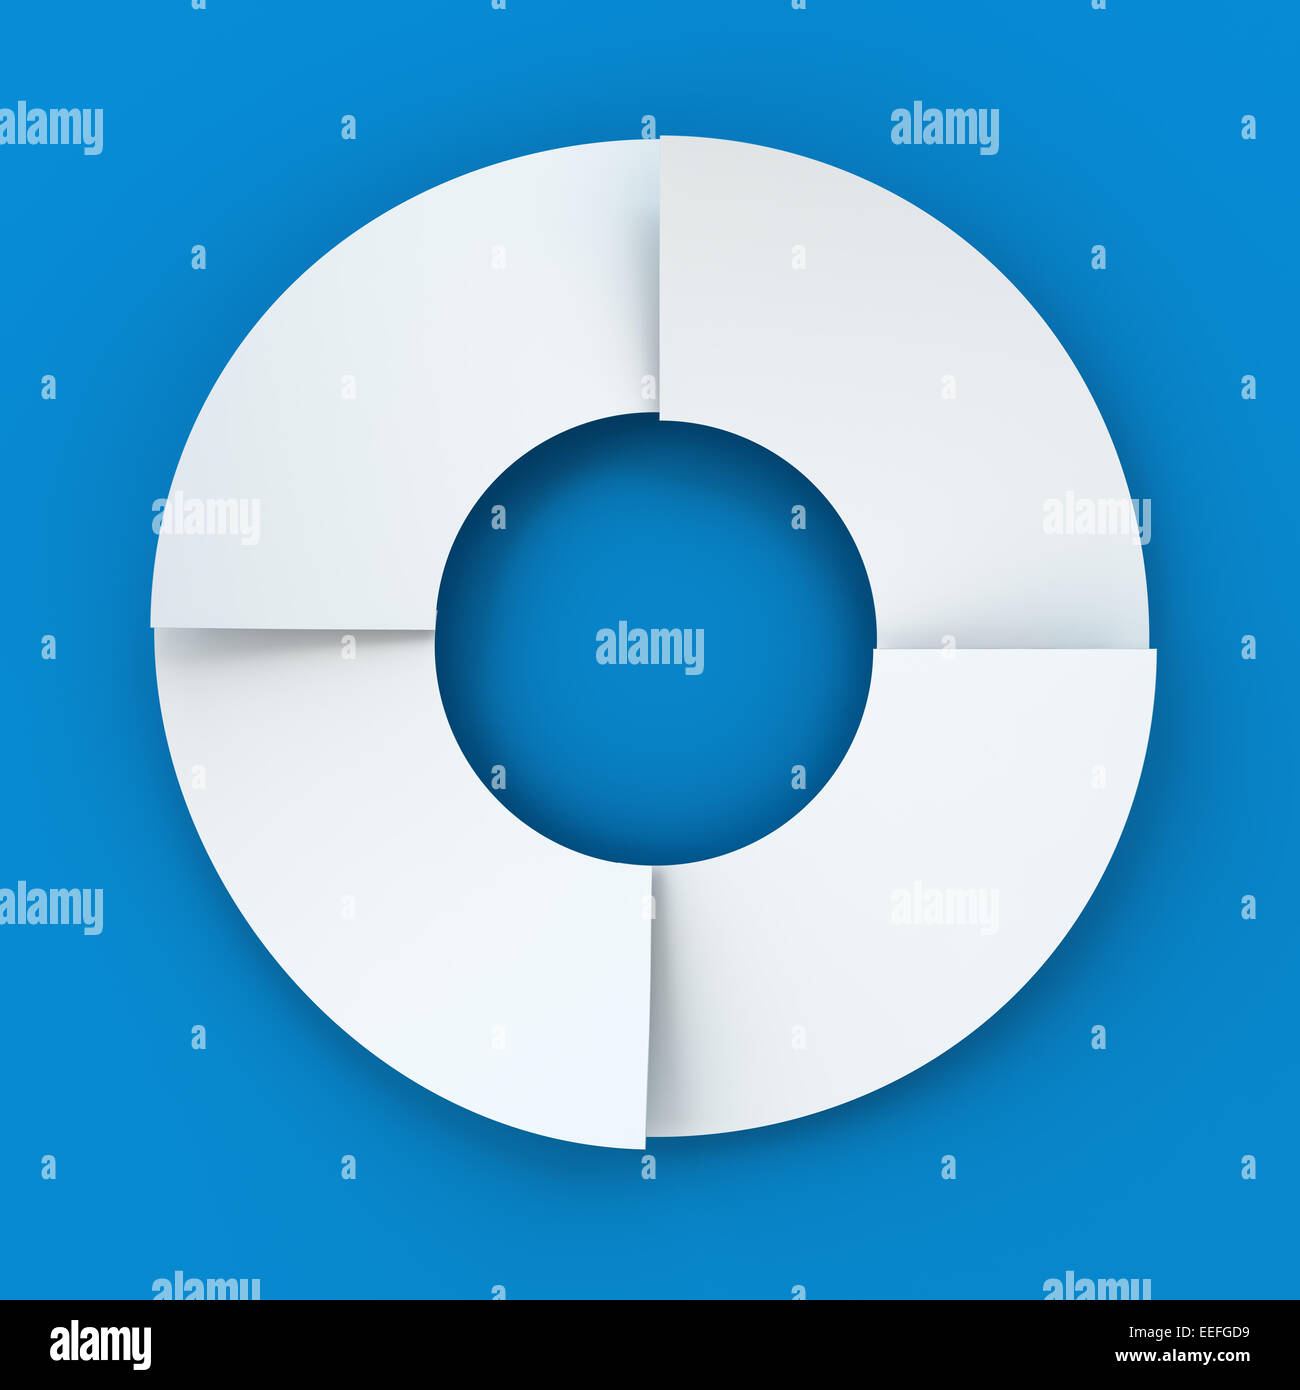 Four steps infographic circle Stock Photo